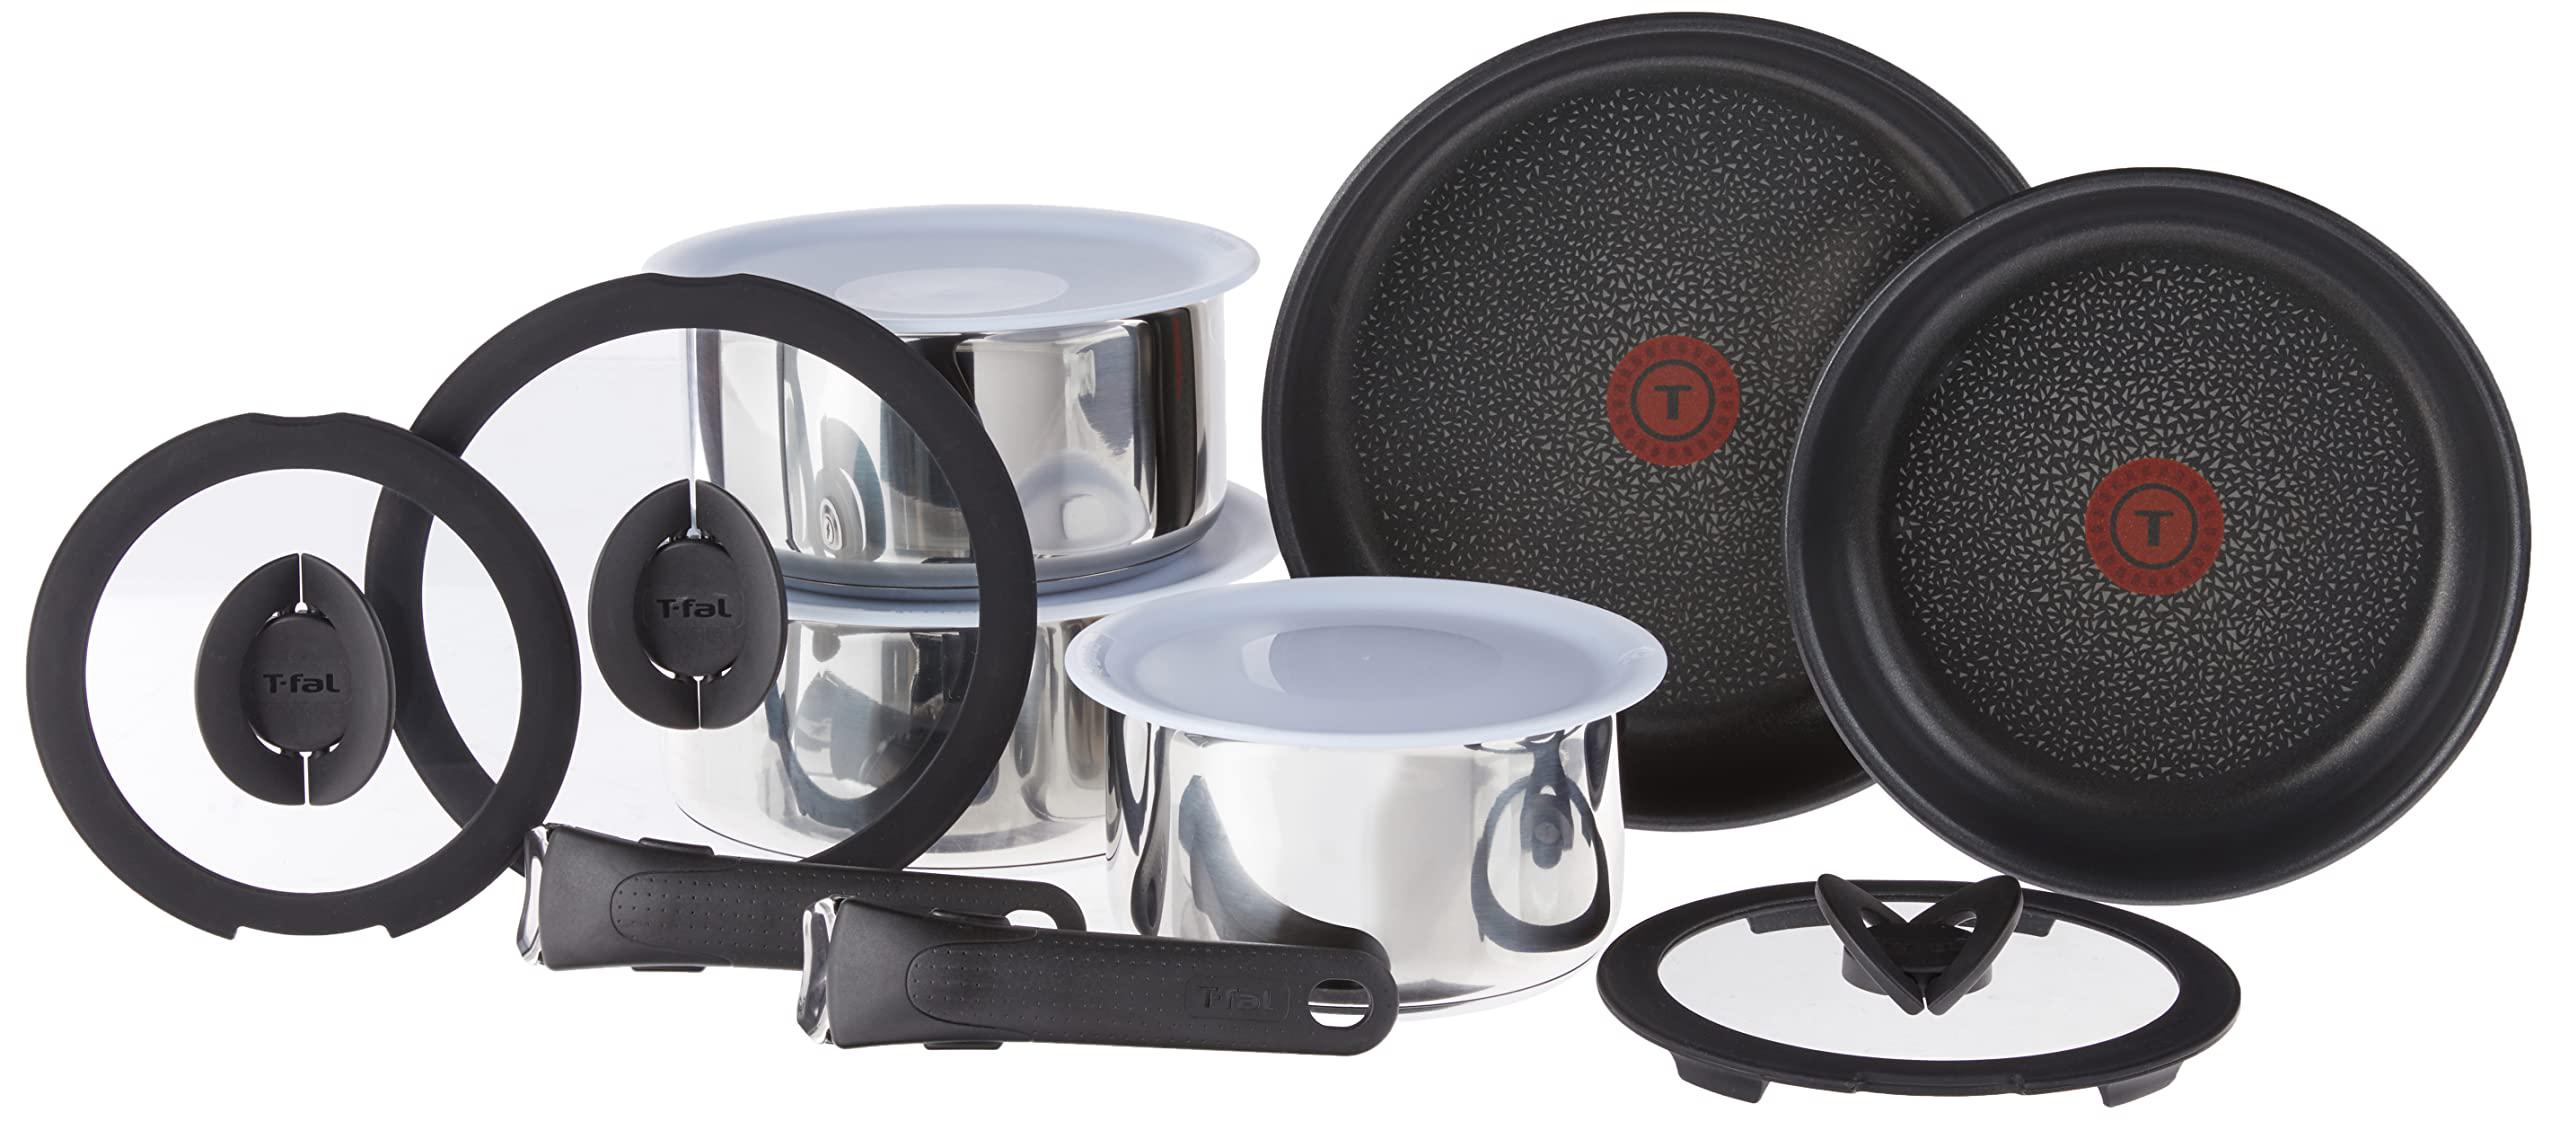 T-fal t-fal ingenio stainless steel cookware set 13 piece